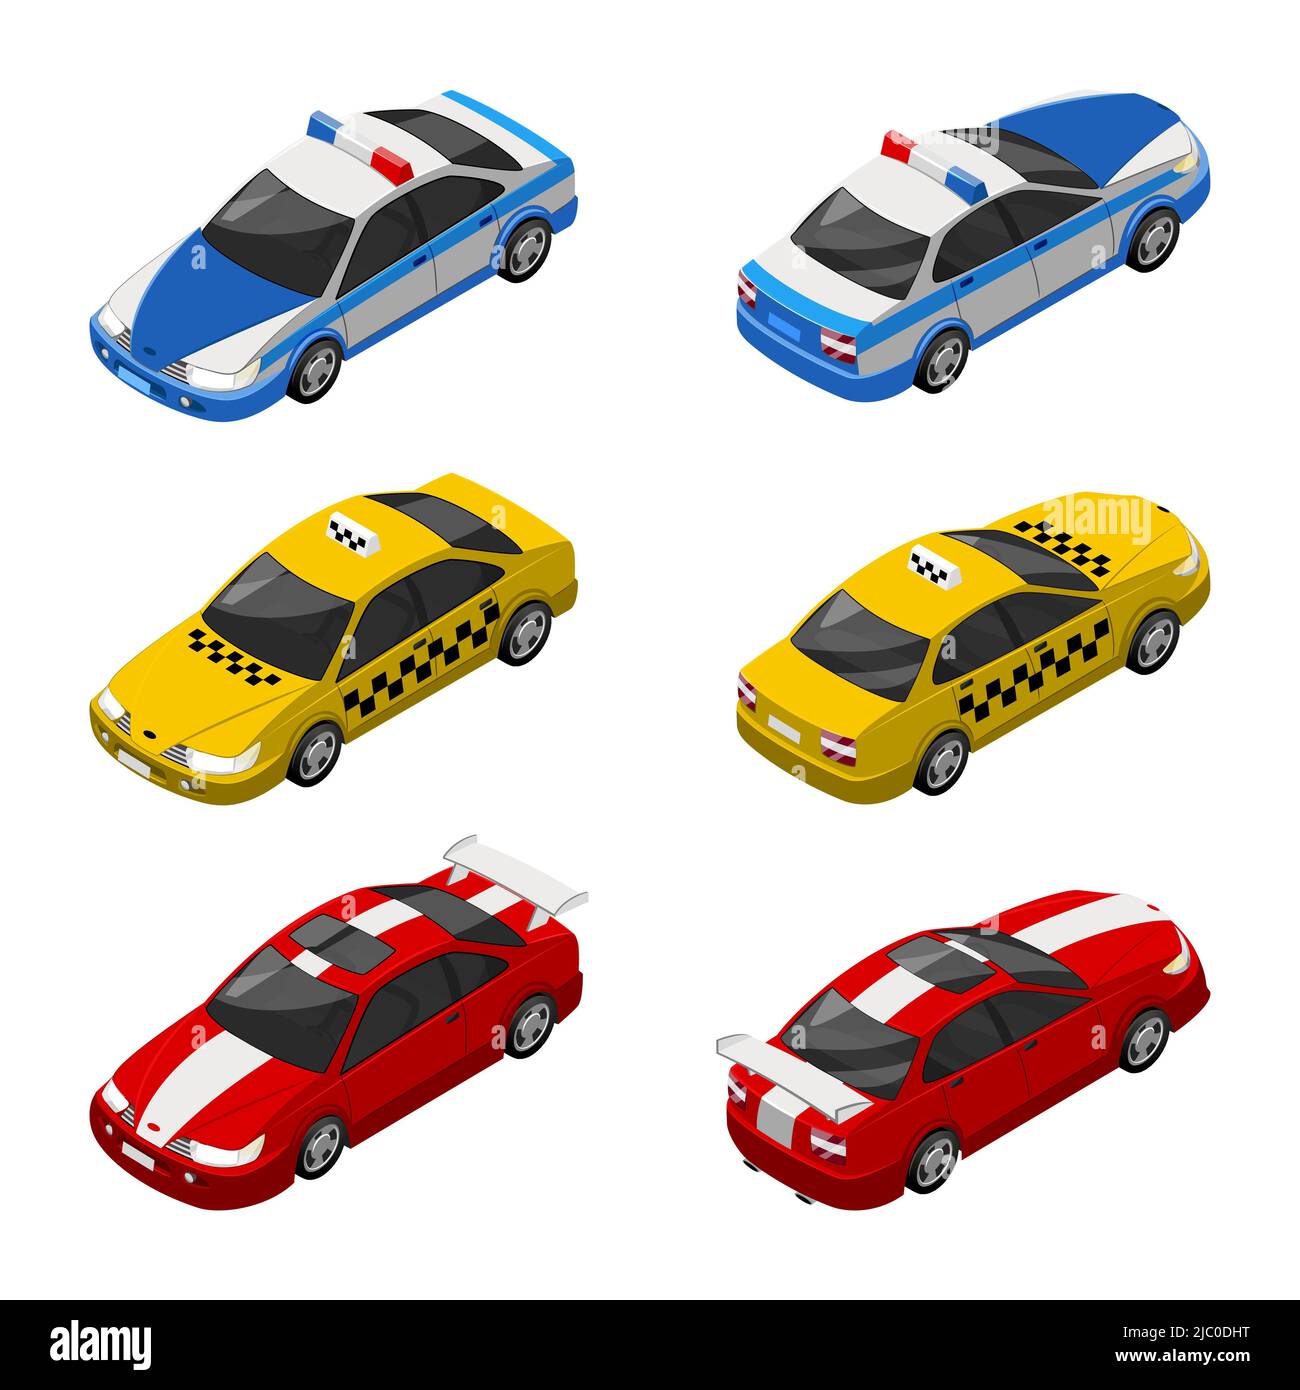 Taxi auto, police vehicle and racing car 3d isometrics. Car auto transportation, taxi vehicle transport and police car. Vector illustration Stock Vector